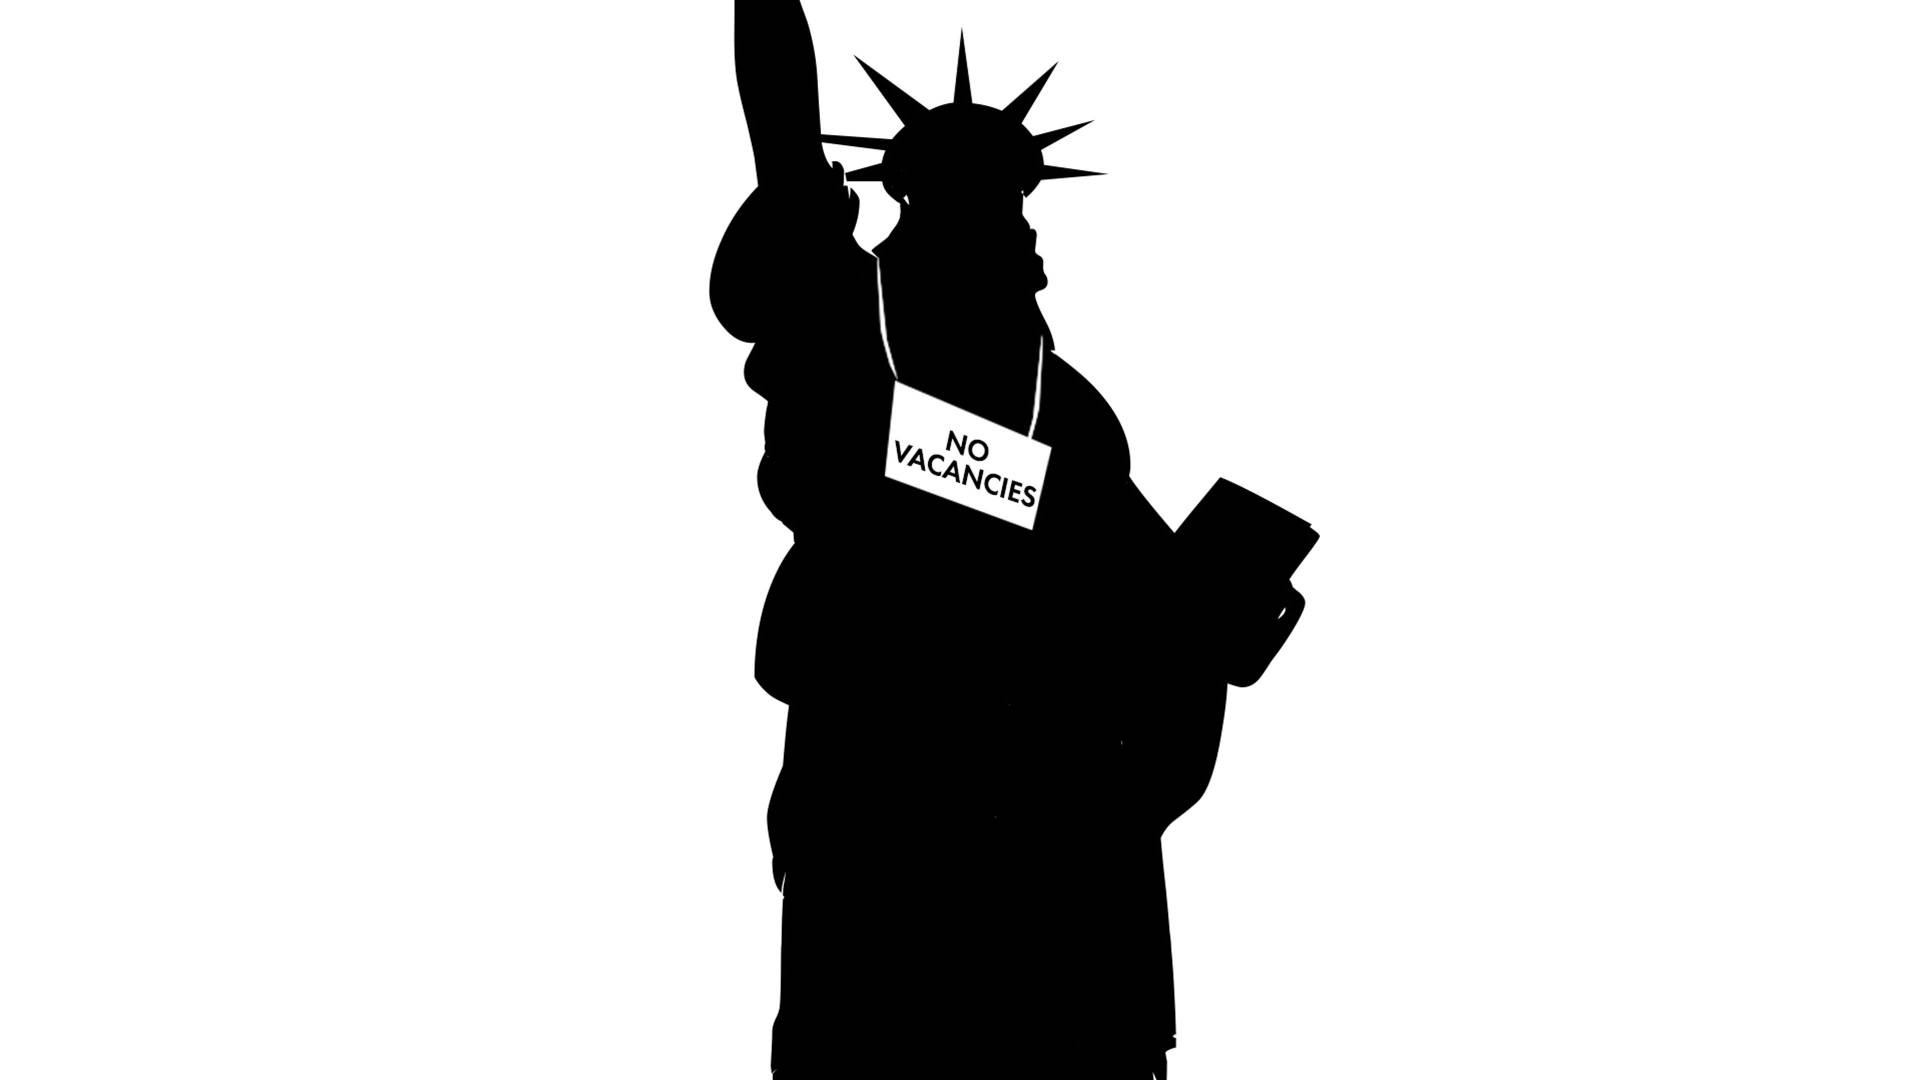 Silhouette of the statue of liberty with a sign around its neck reading "No Vacancies"